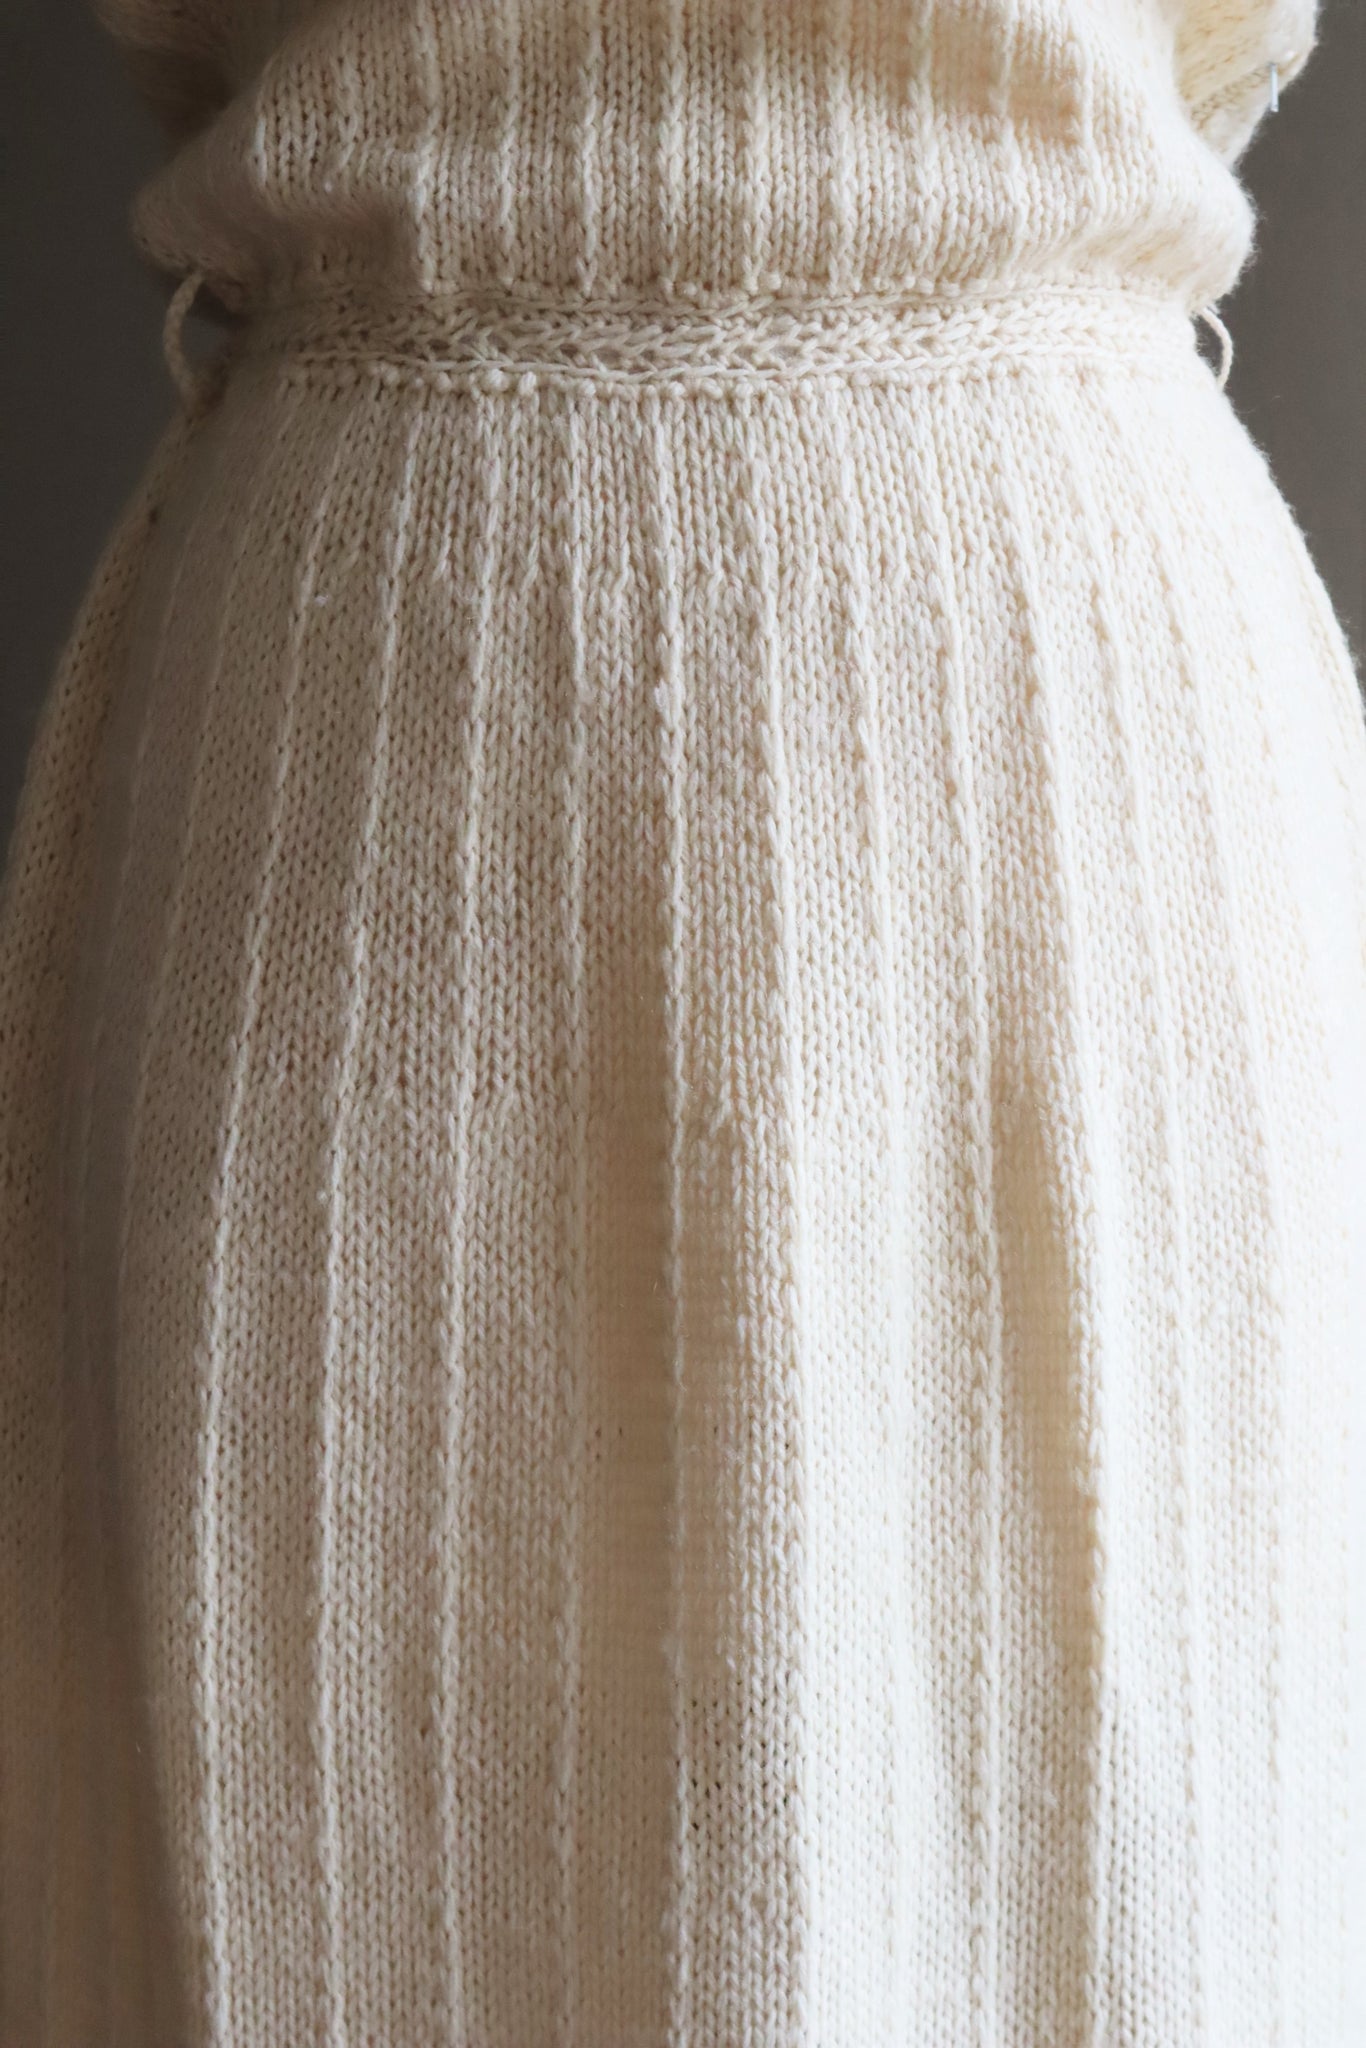 70s Hand-Knitted Wool Dress